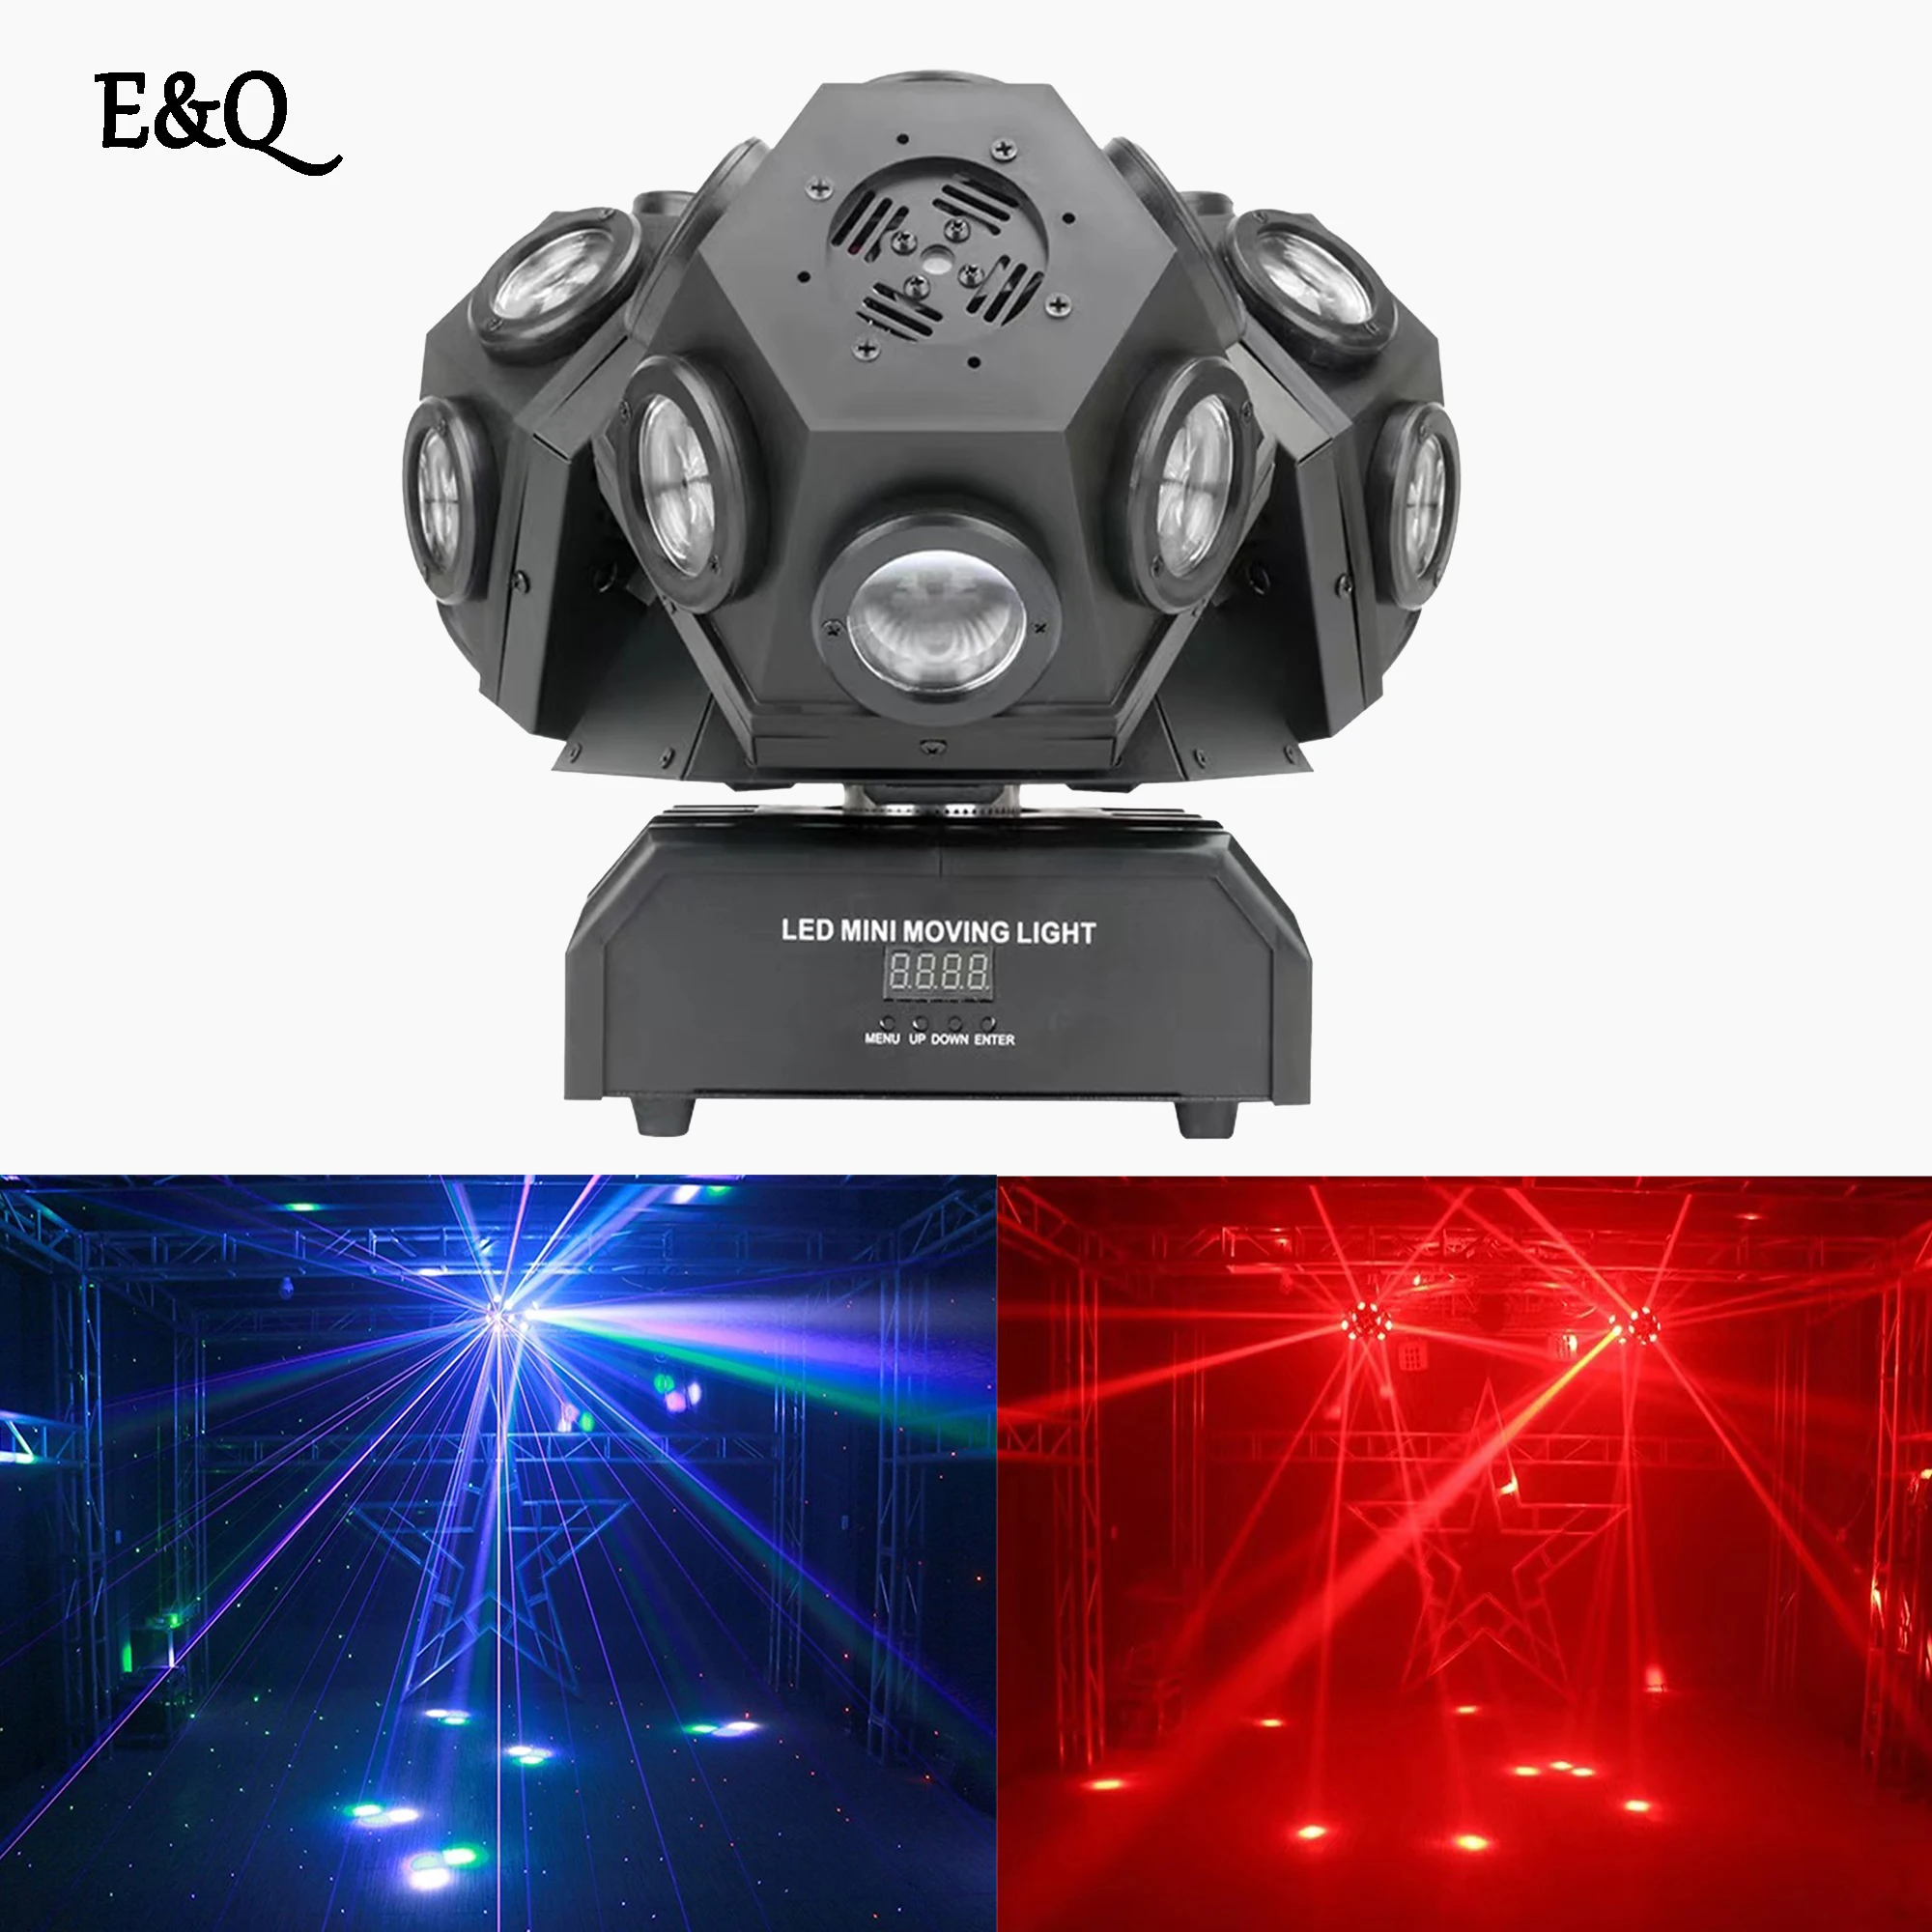 

18x10w RGBW 4in1 LED Beam Moving Head Light 3 Heads Beam with RGB Laser Stage Lighting Projector DMX DJ Disco Xmas Party Lights